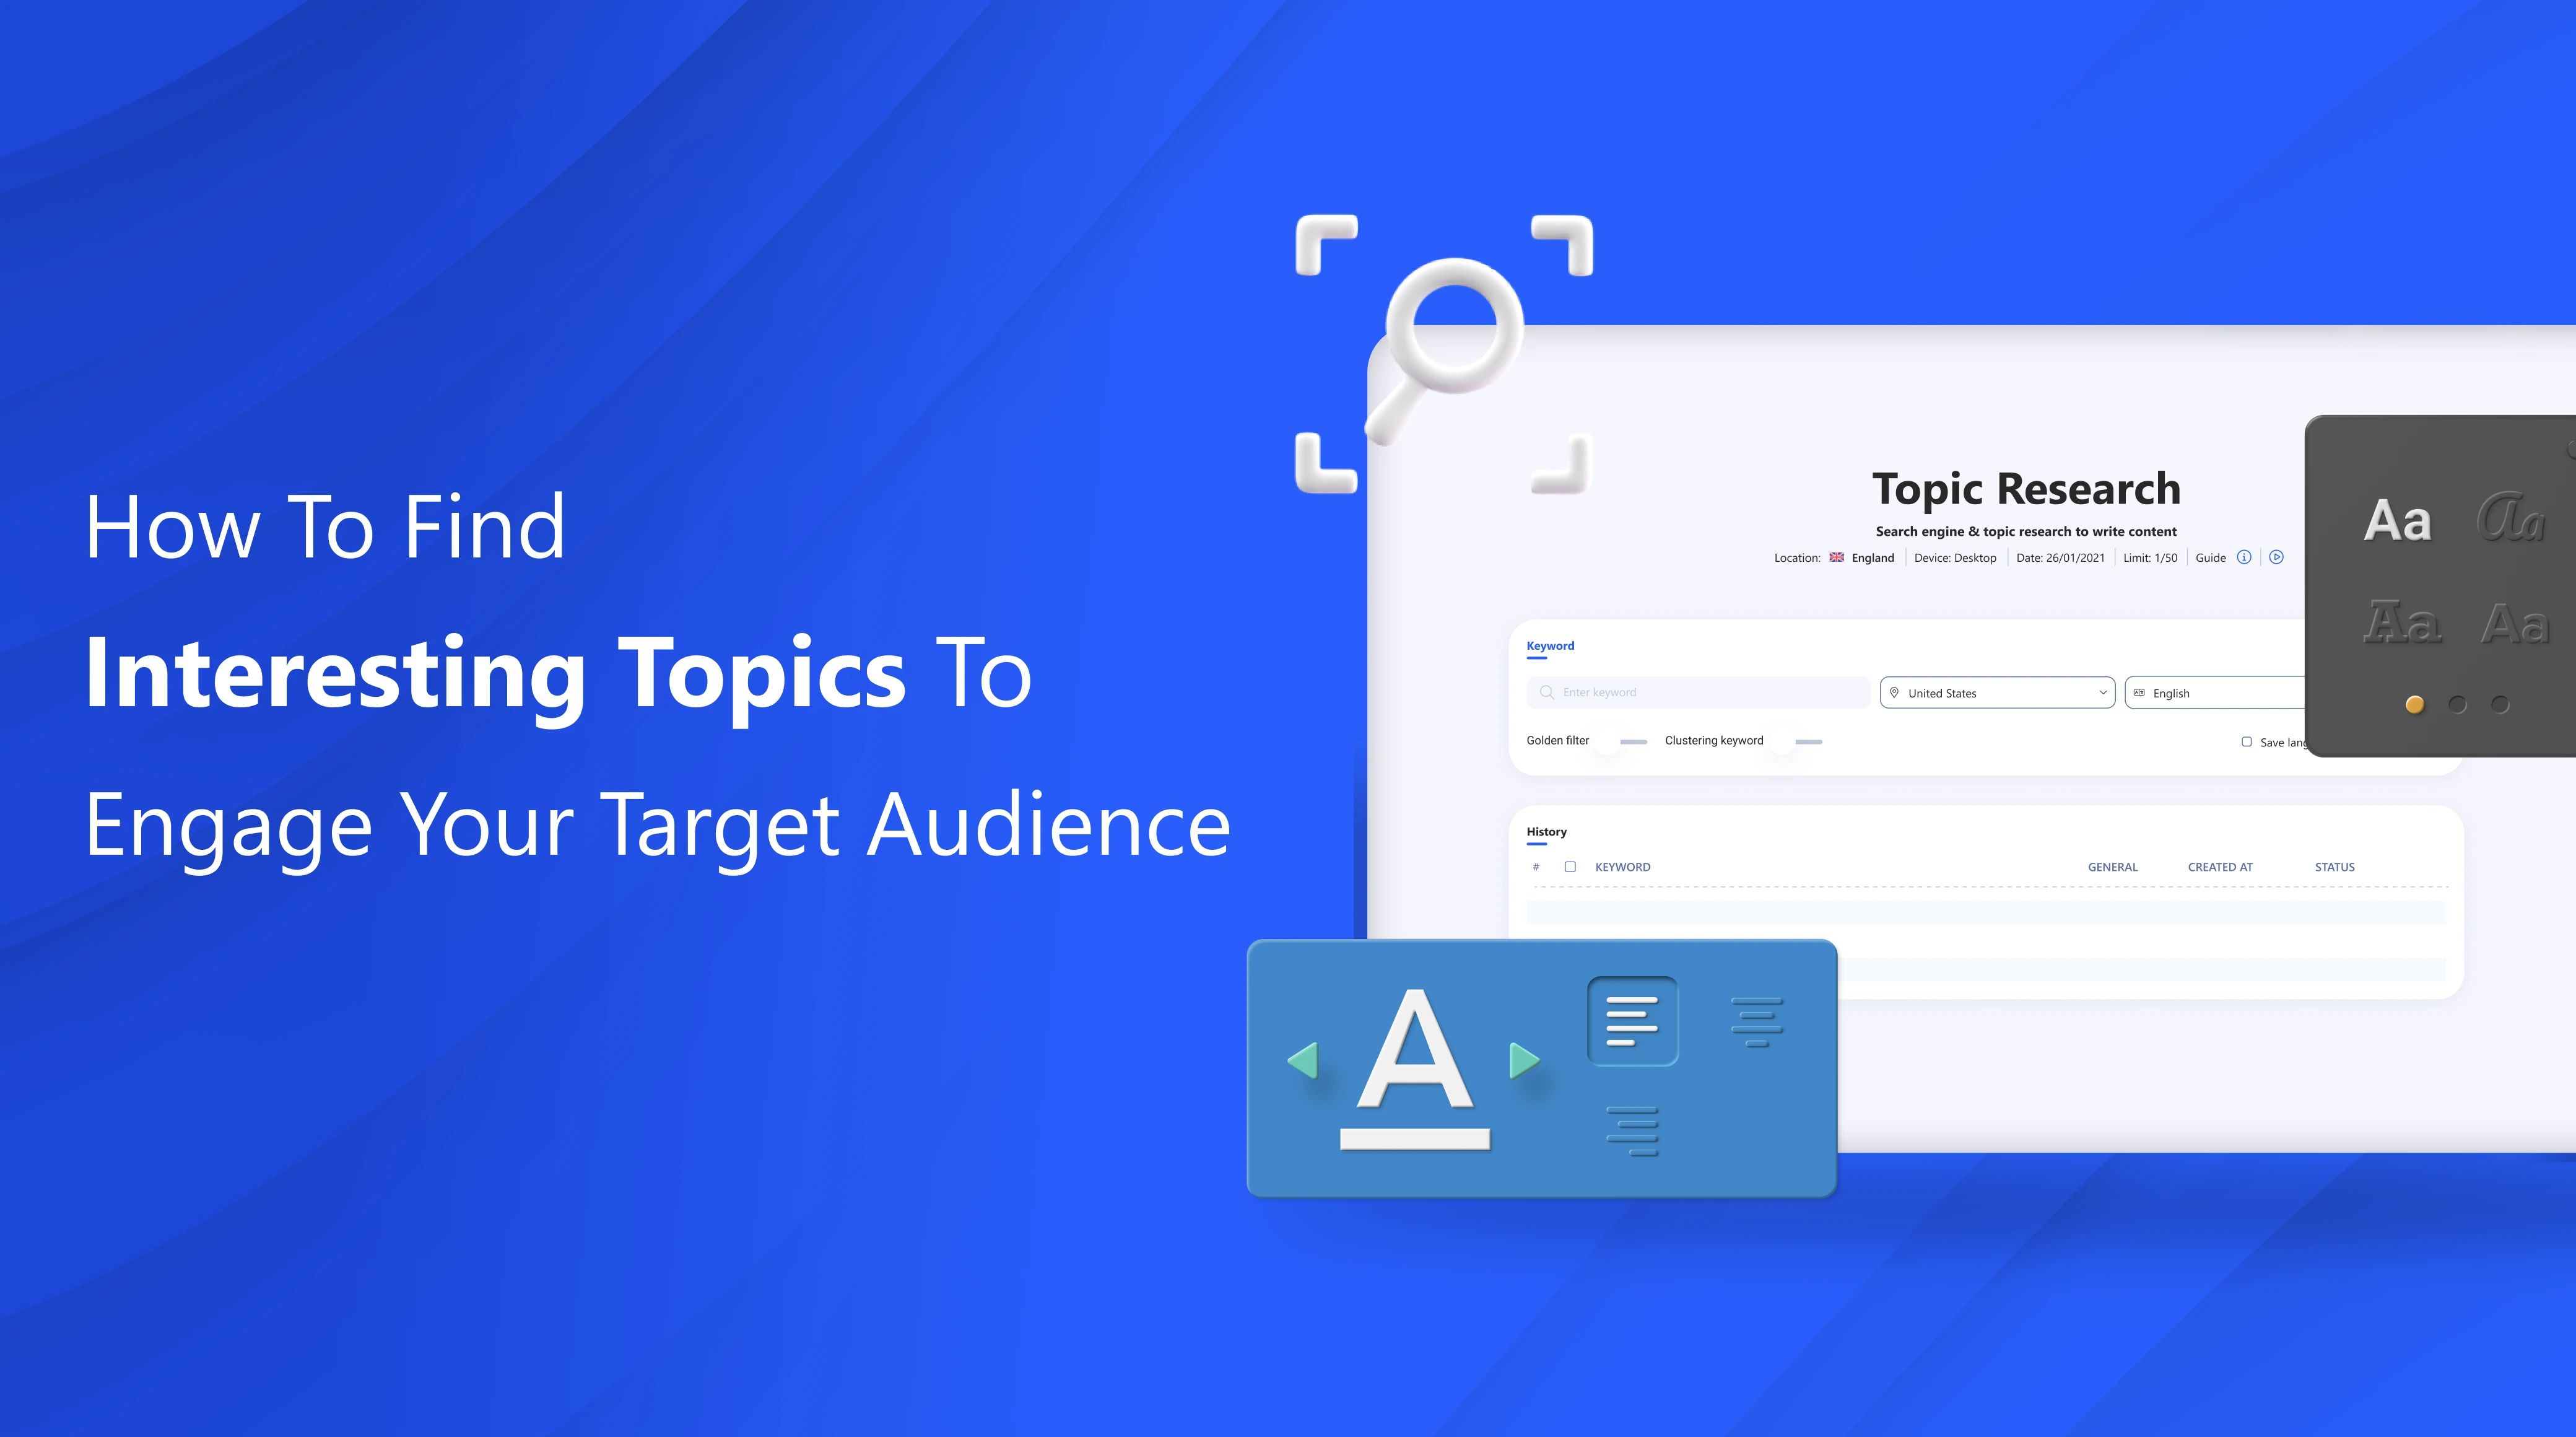 How to Find Interesting Topics to Engage Your Target Audience